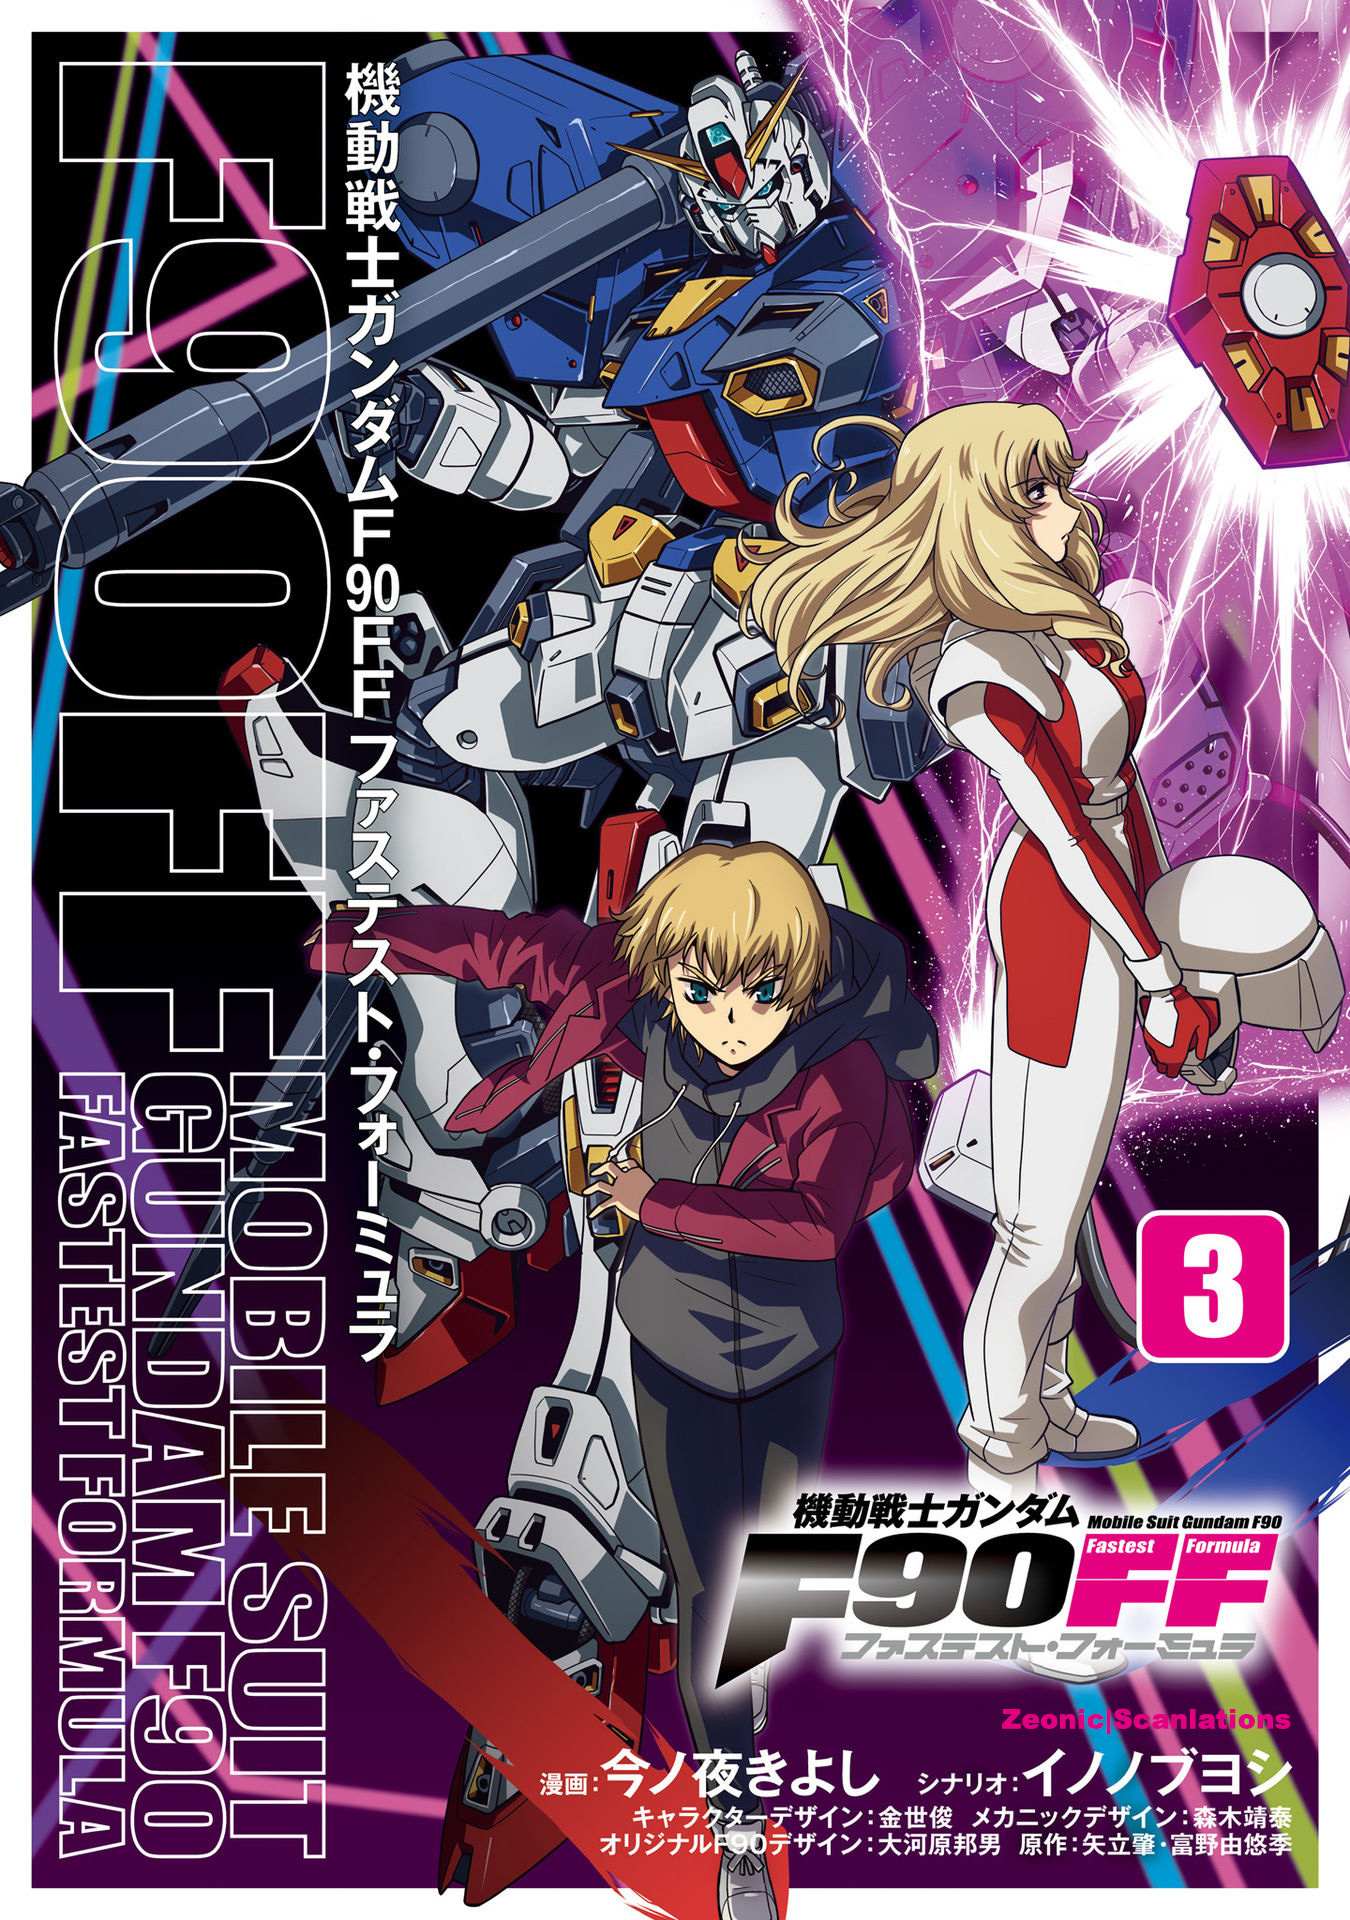 Mobile Suit Gundam F90 FF - chapter 7.5 - #2